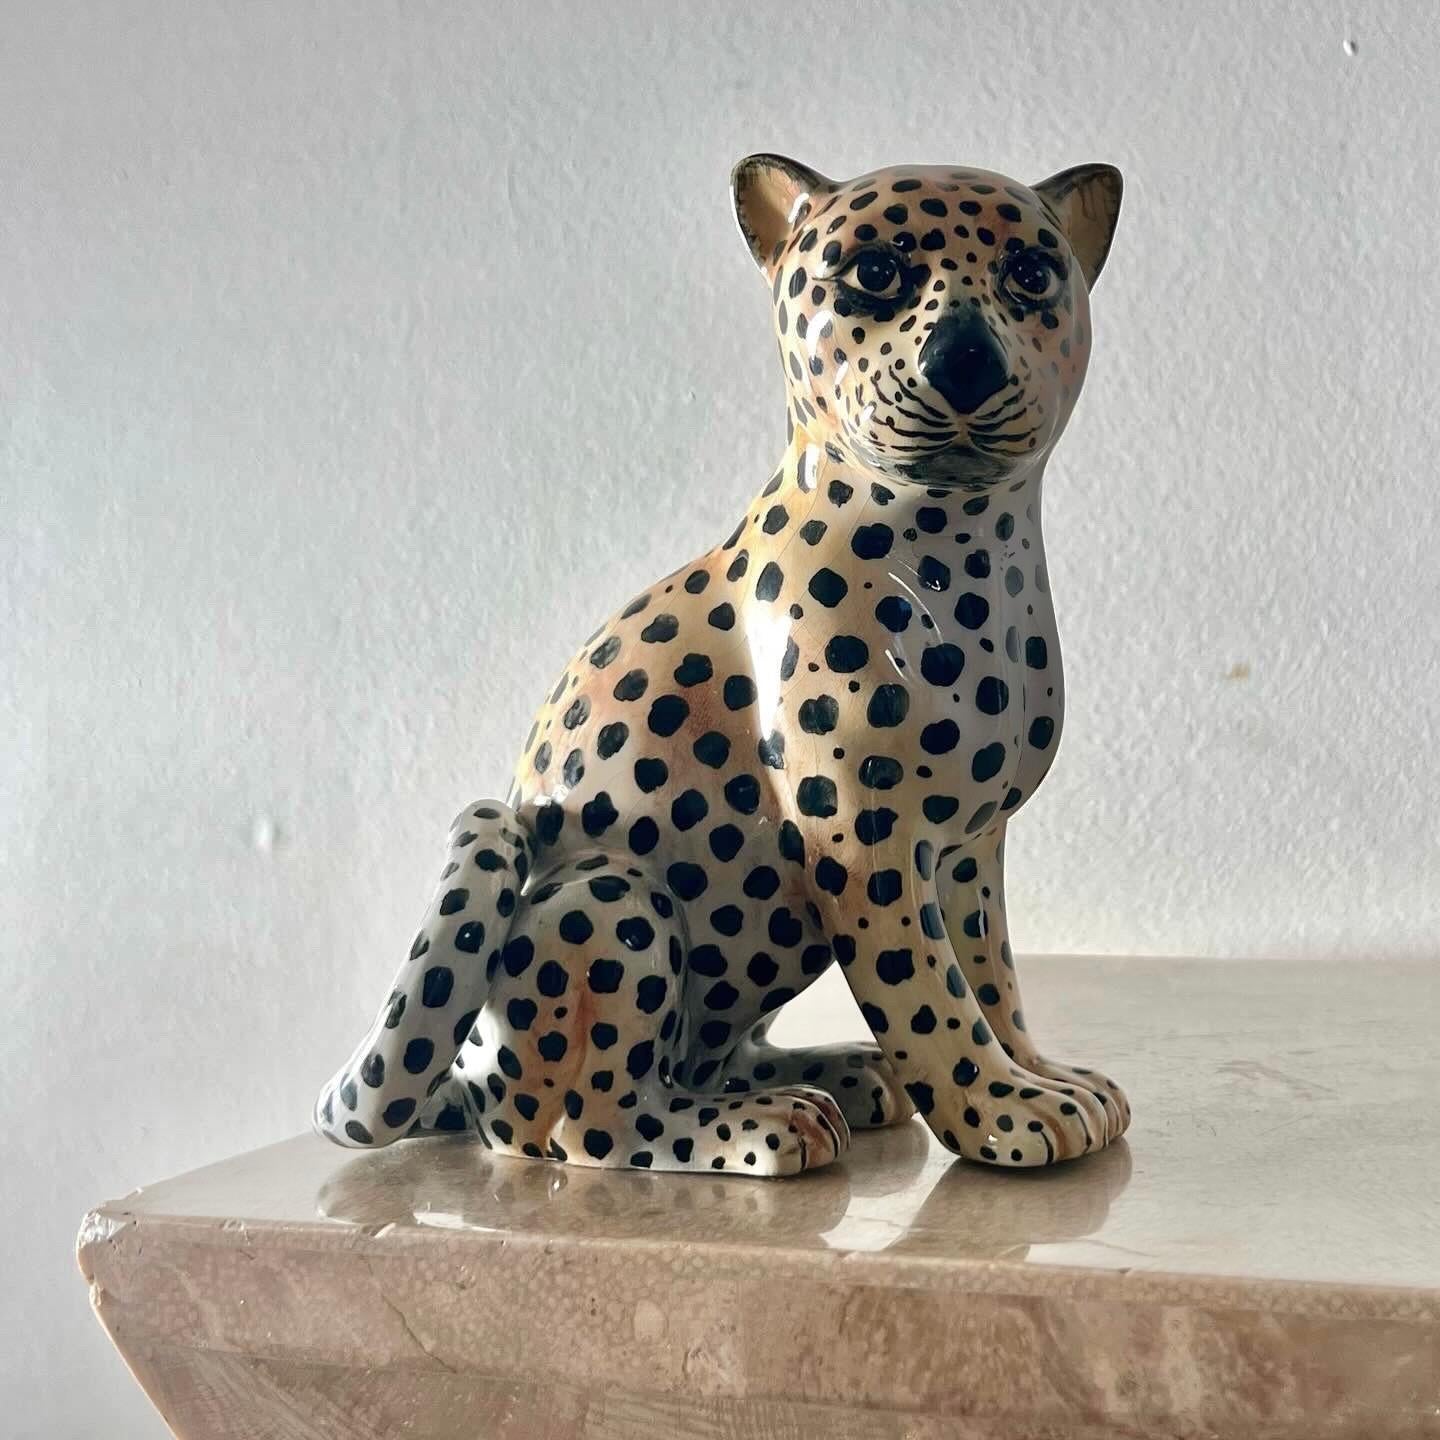 IL FELINA: a vintage Italian ceramic sculpture of a leopard, 1960s. Potentially porcelain. Pick up in central west Los Angeles or we ship worldwide. 
6” W x 3.5” D x 6.5” 